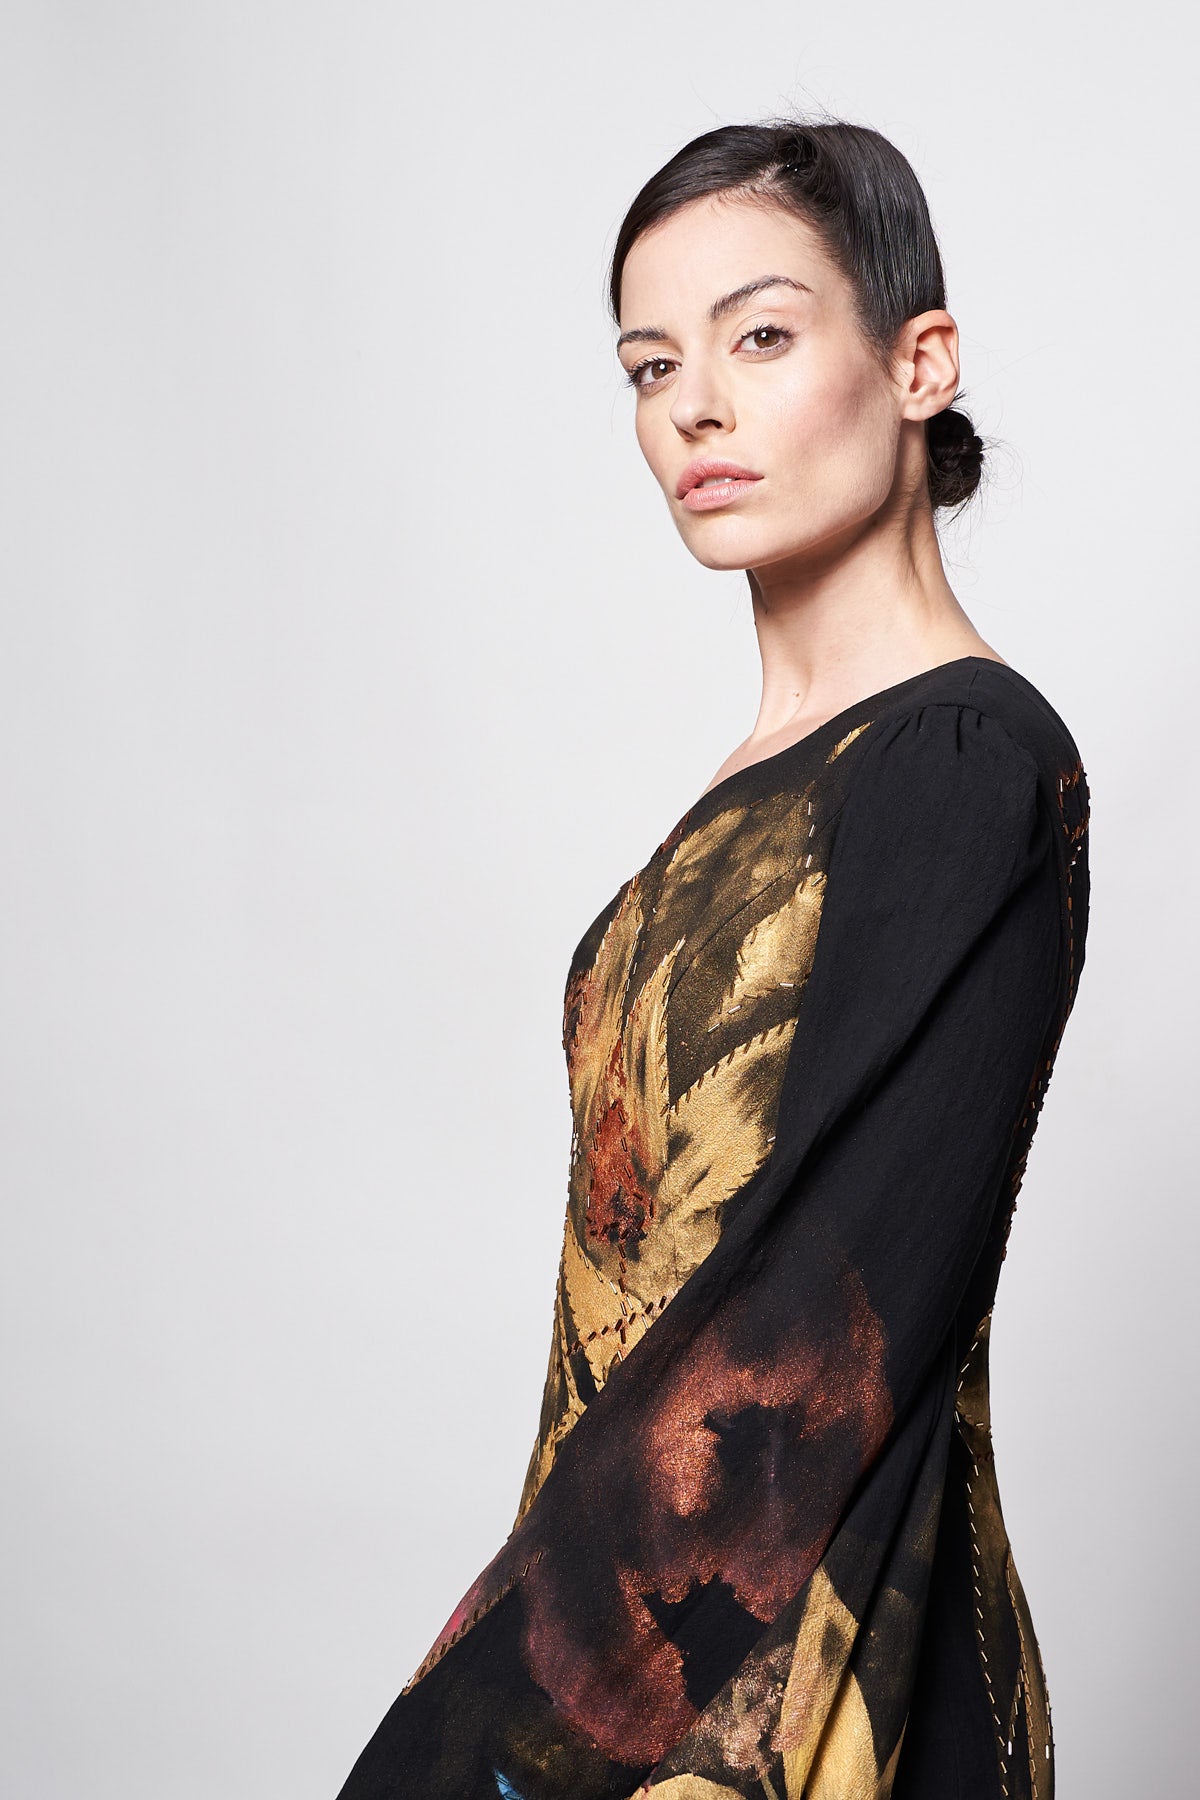 LONG ONE SHOULDER DRESS HAND-PAINTED AND HAND-EMBROIDERED - TALAVERA ORO